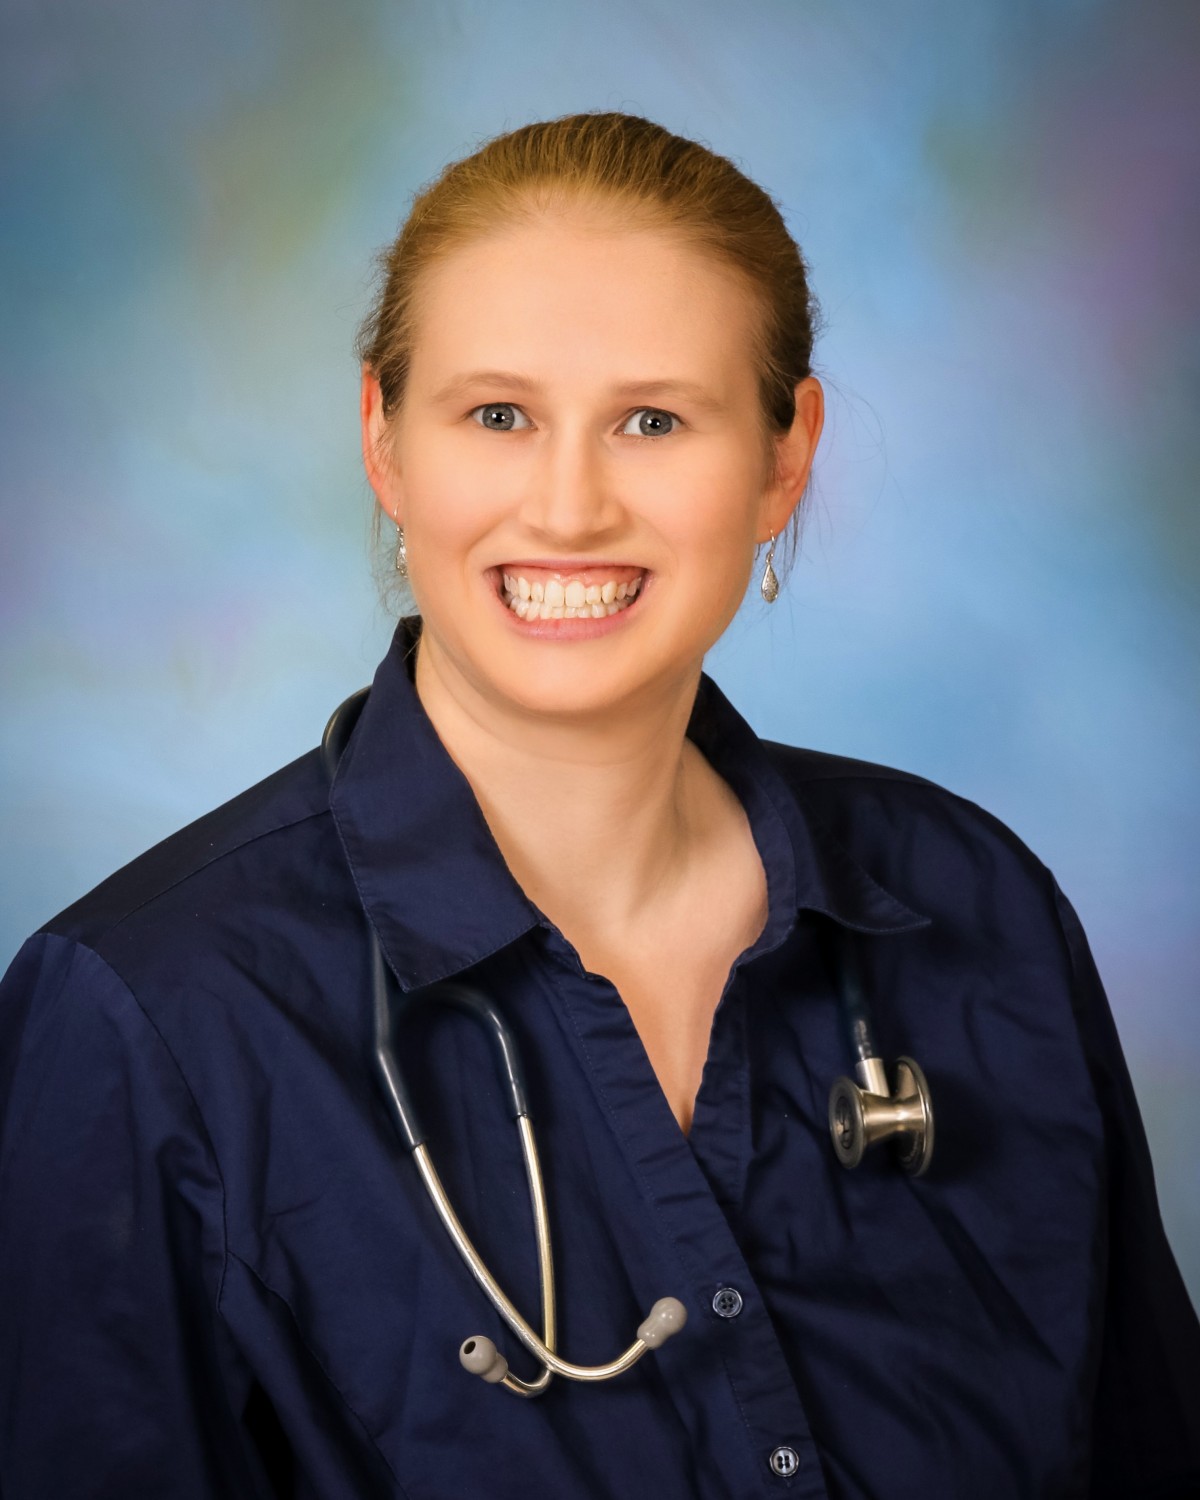 Dr. Hodgkins has been providing veterinary care in Augusta for 5 years.